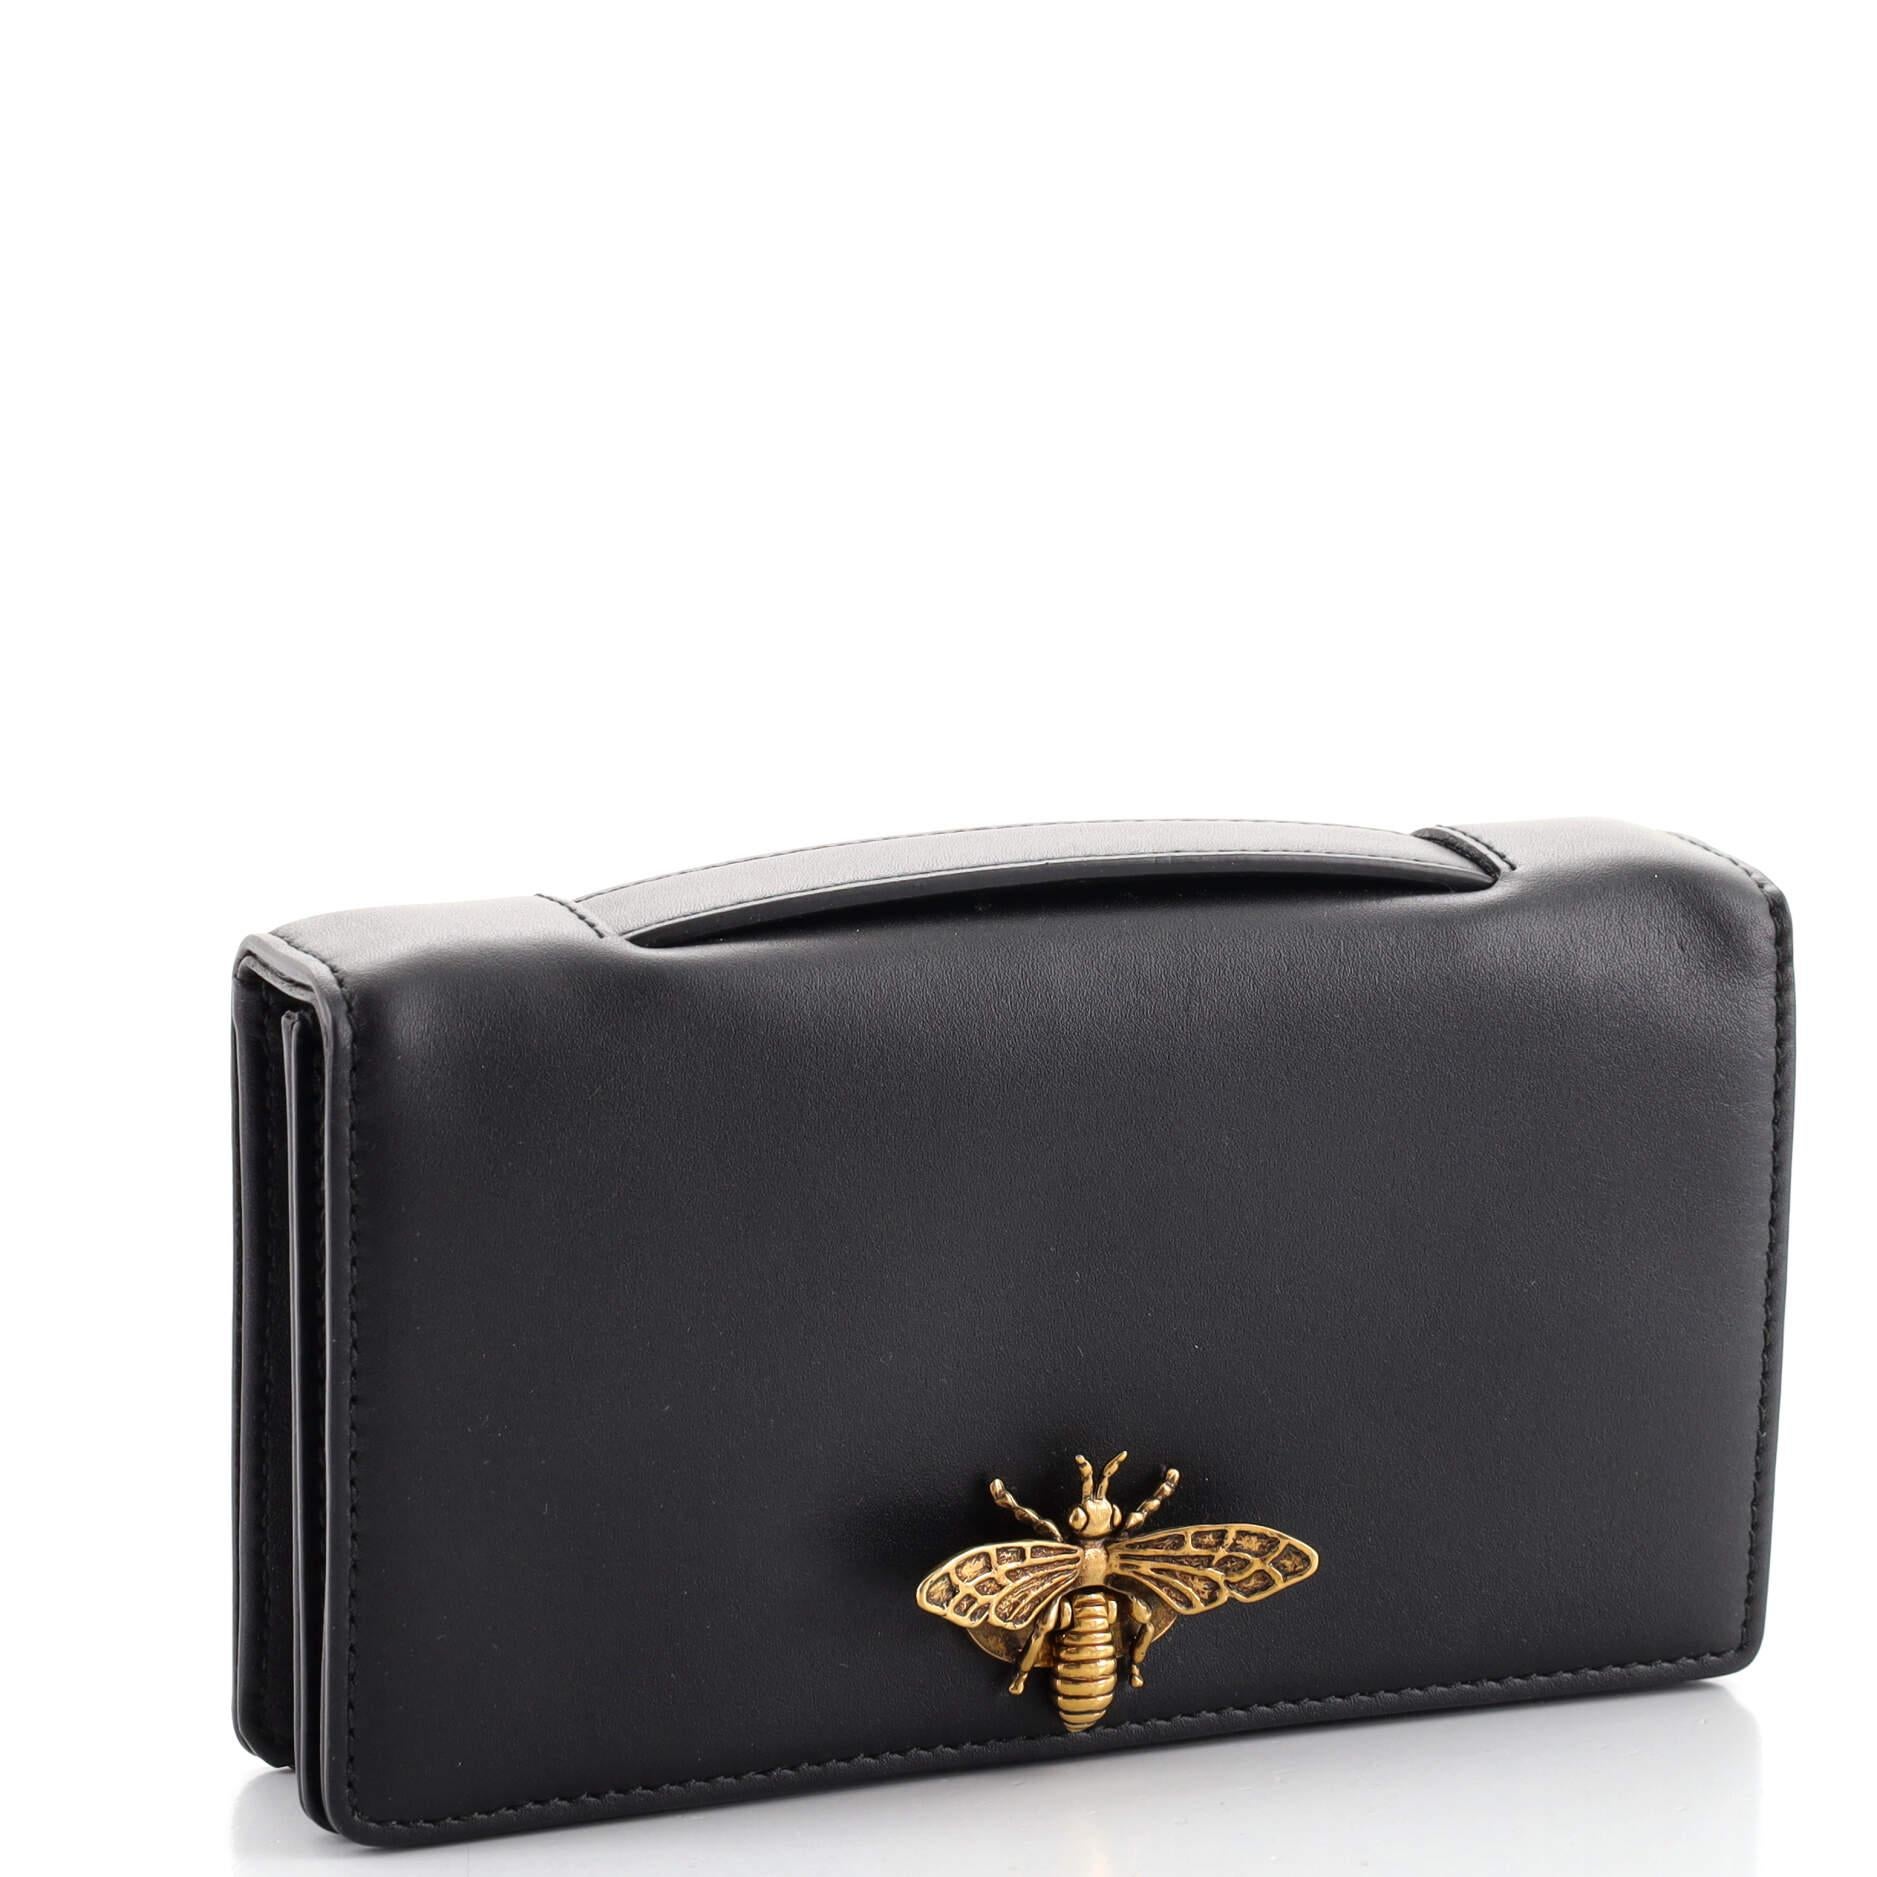 Black Christian Dior Bee Pouch Clutch Leather